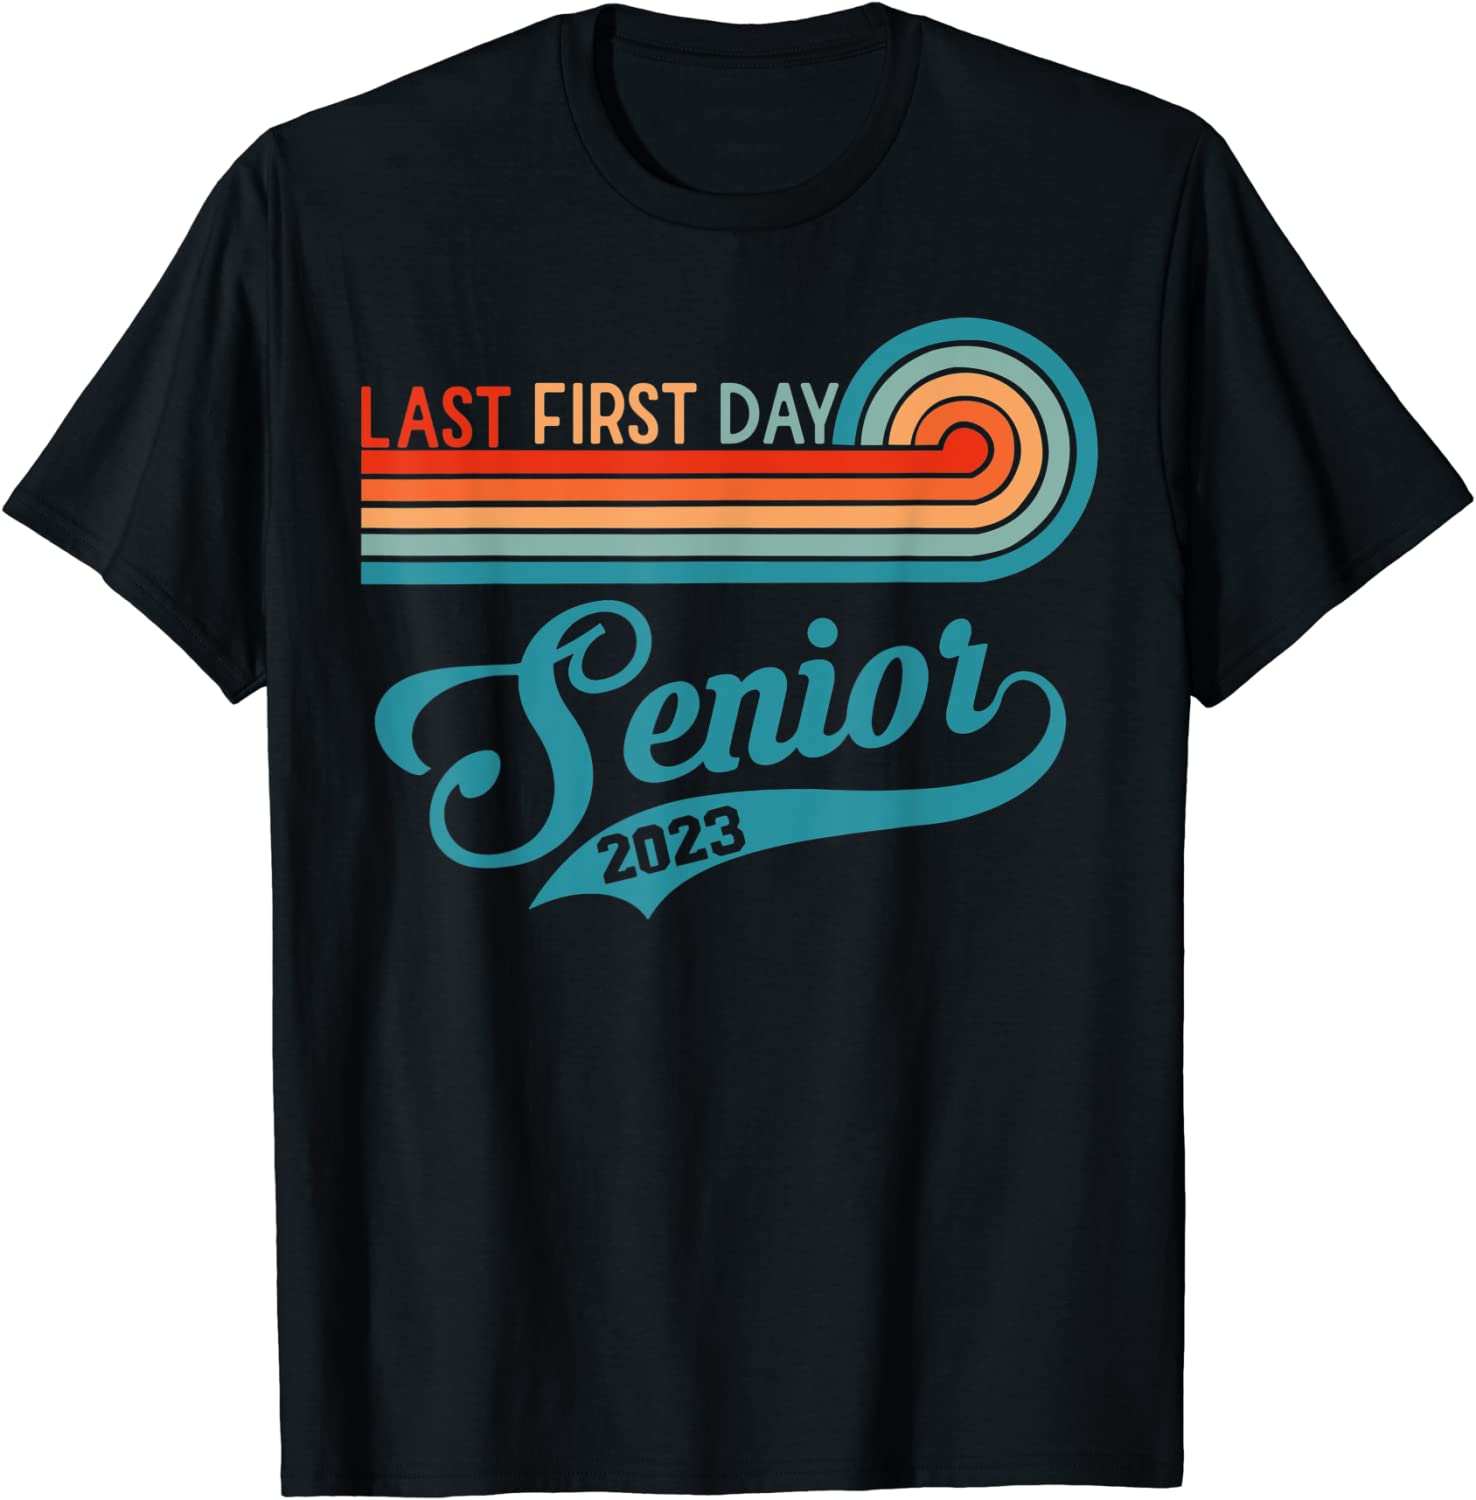 Senior 2023 CLASS OF 2023 Back To School 2023 or Graduation Funny T ...